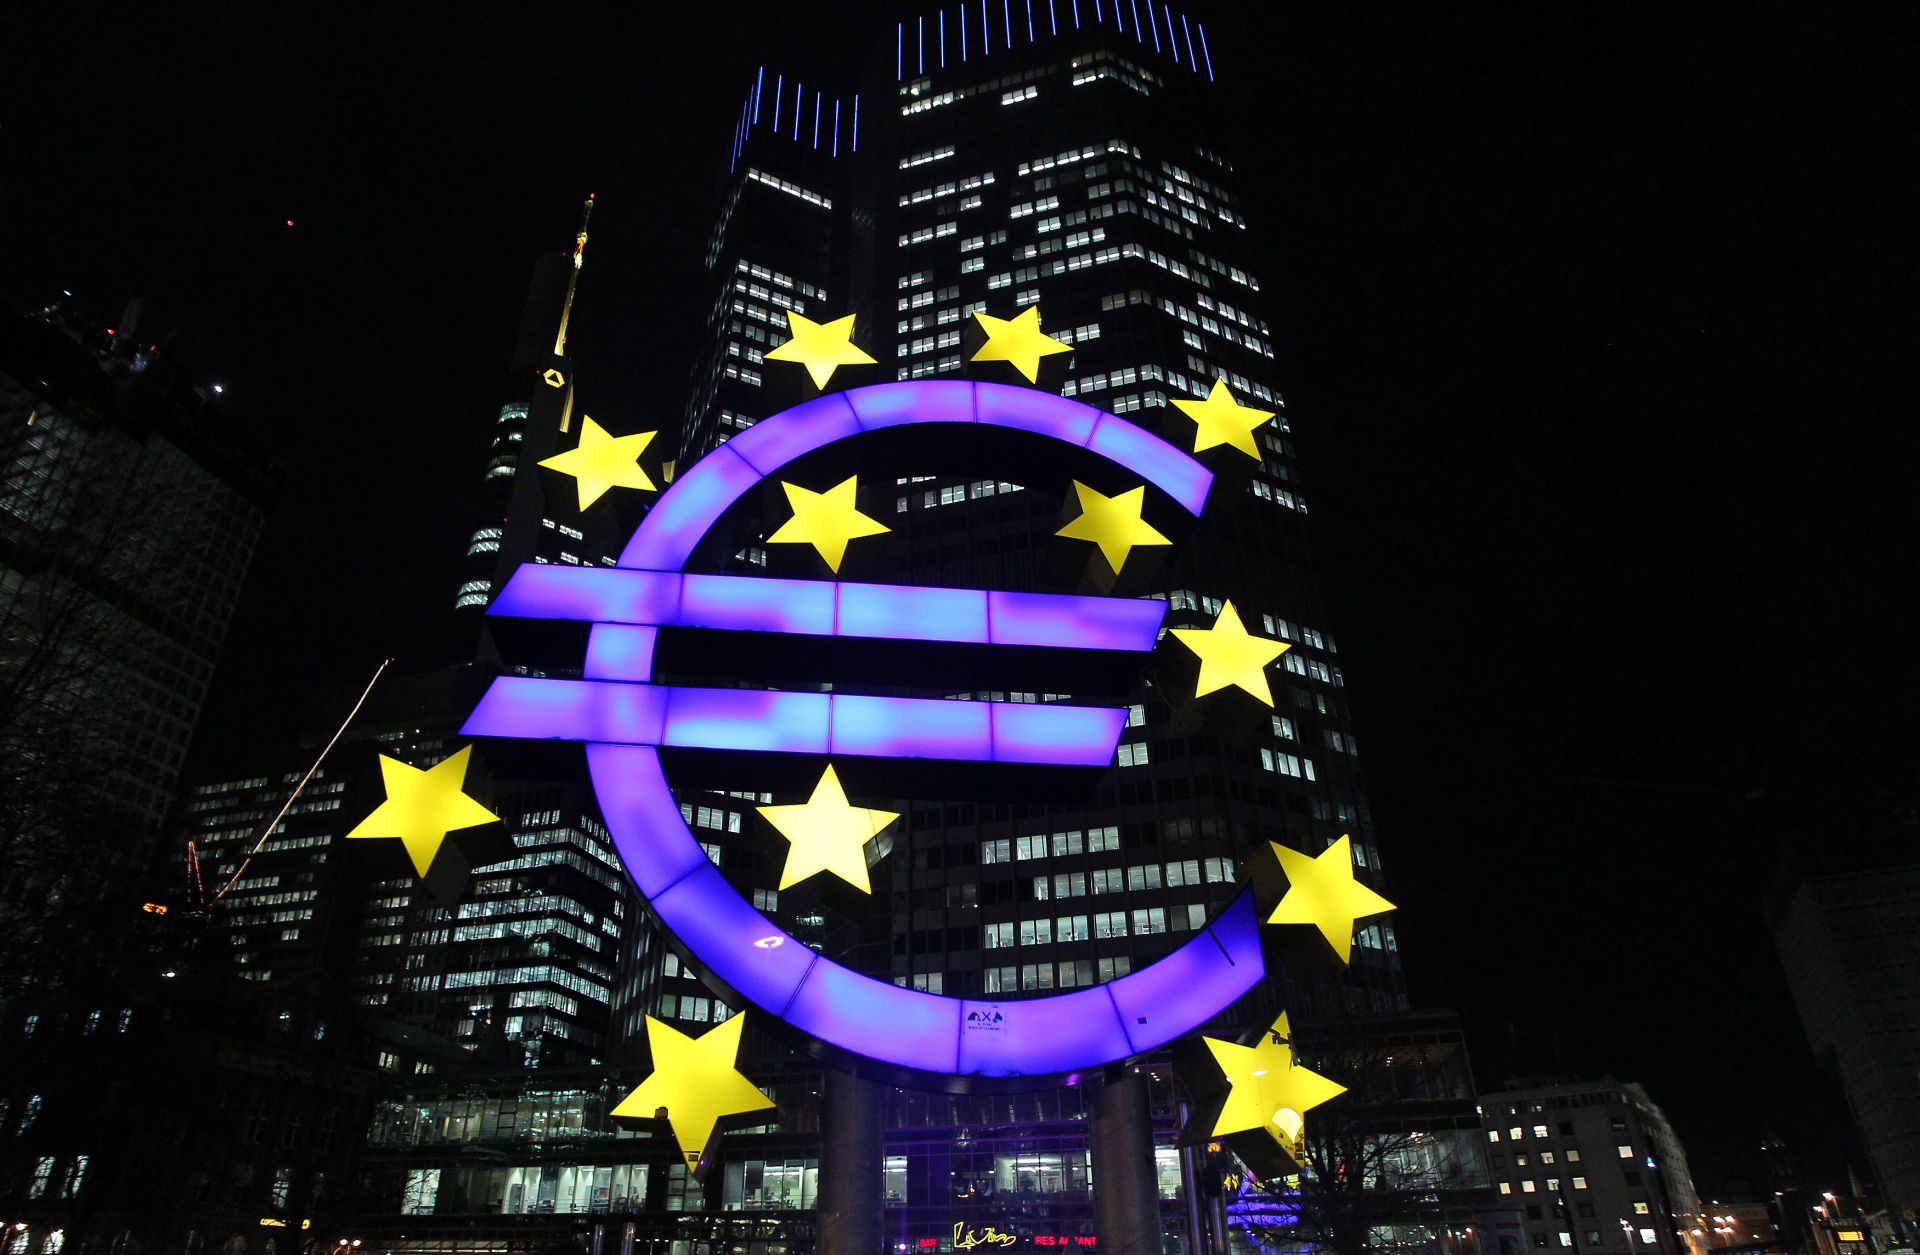 The illuminated sculpture by German artist Ottmar Hoerl's depicting the Euro is seen in front of the European Central Bank.